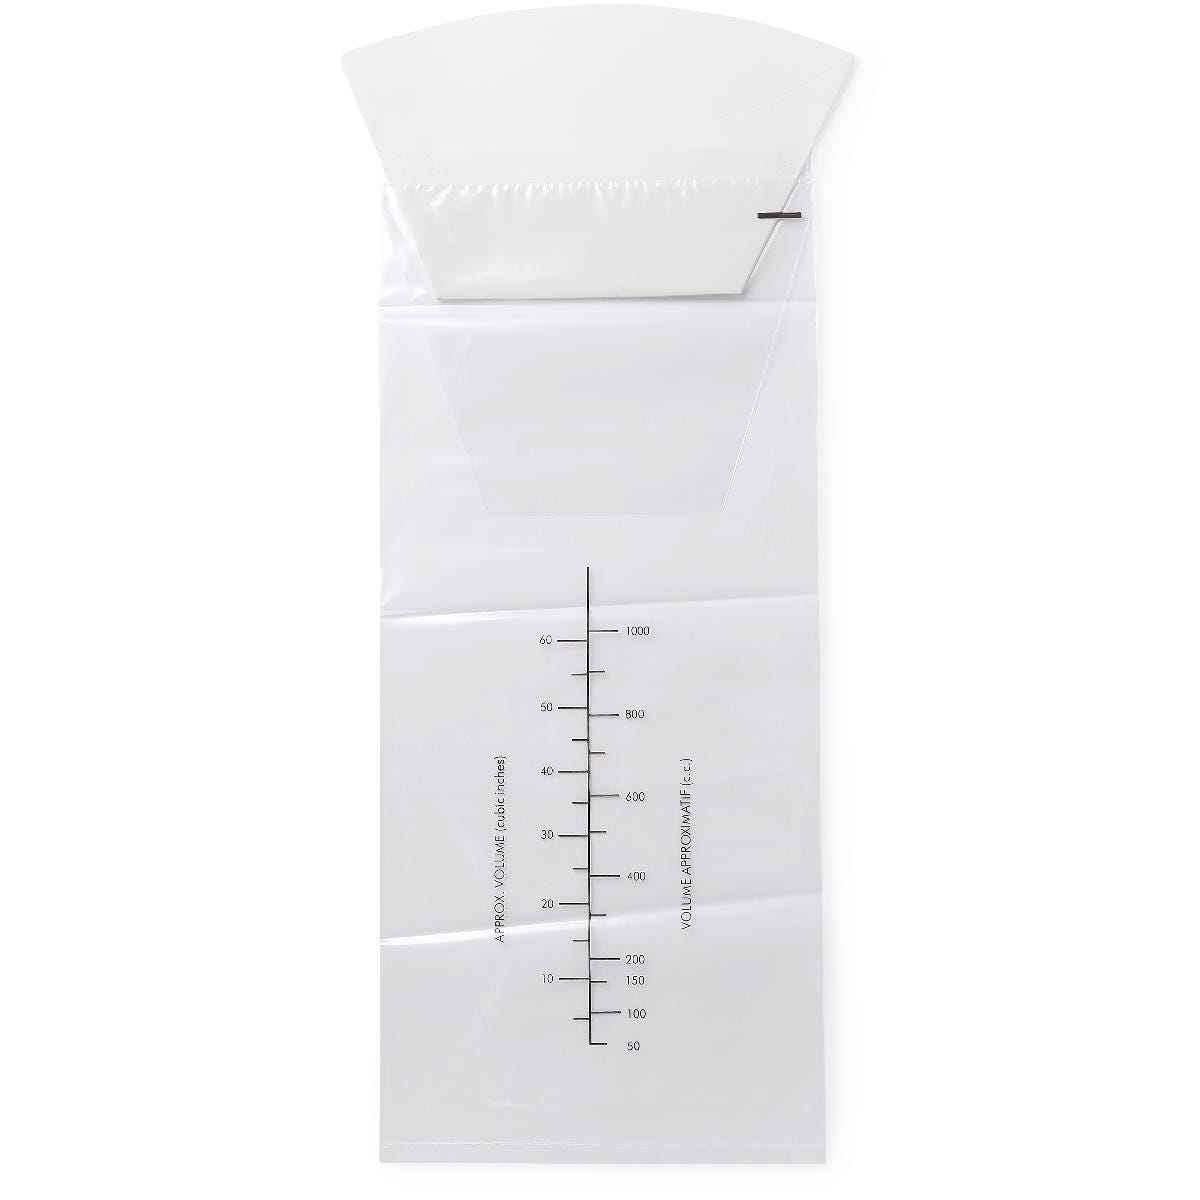 Emesis Bag: Clean Sack Clear for Sickness Clean-up with Graduations - 100/pack